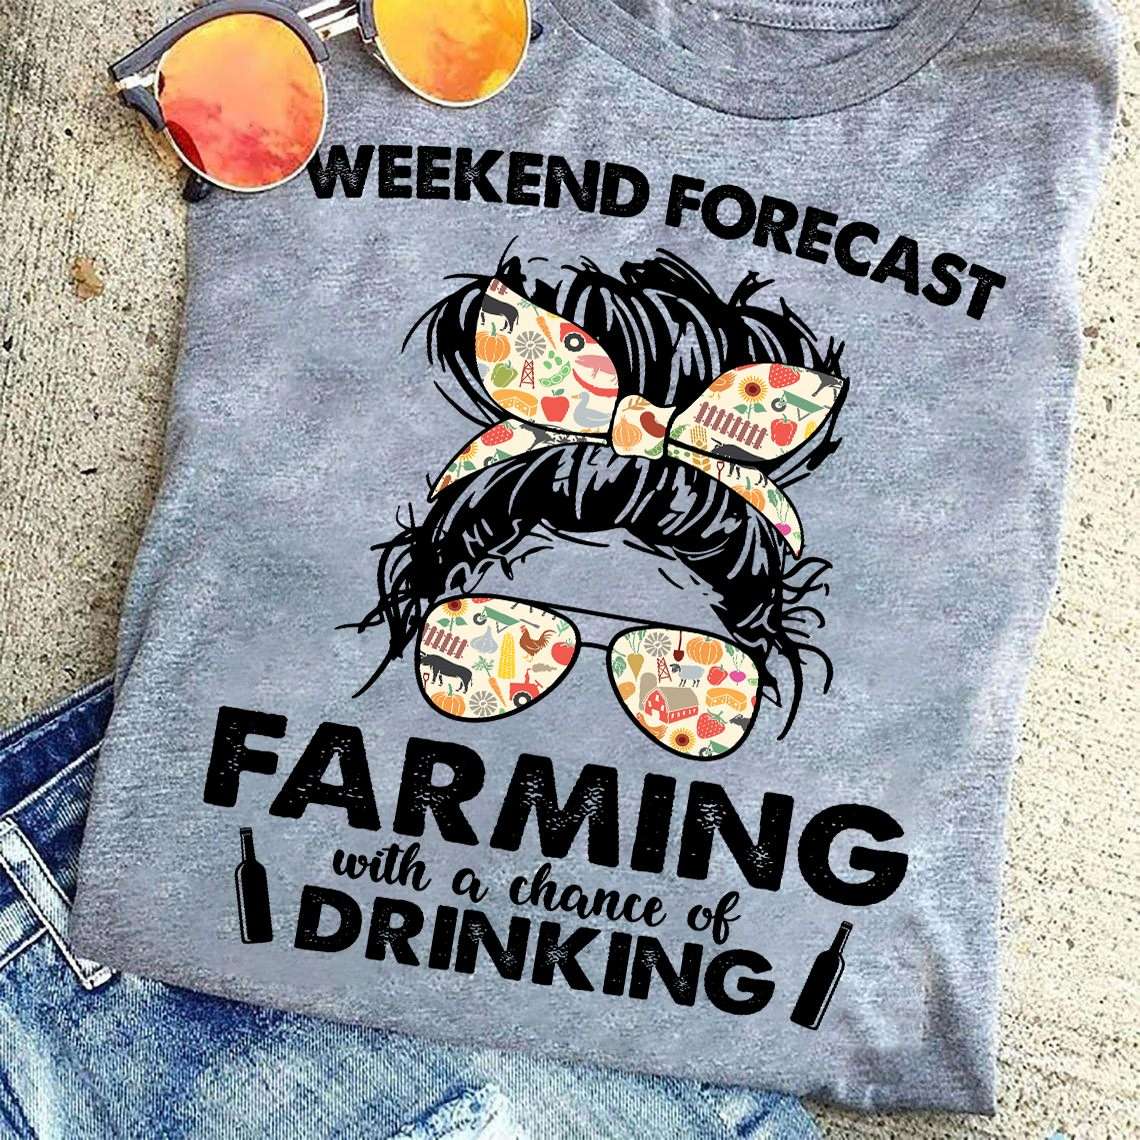 Farming Girl Drinking - Weekend forecast farming with a chance of drinking